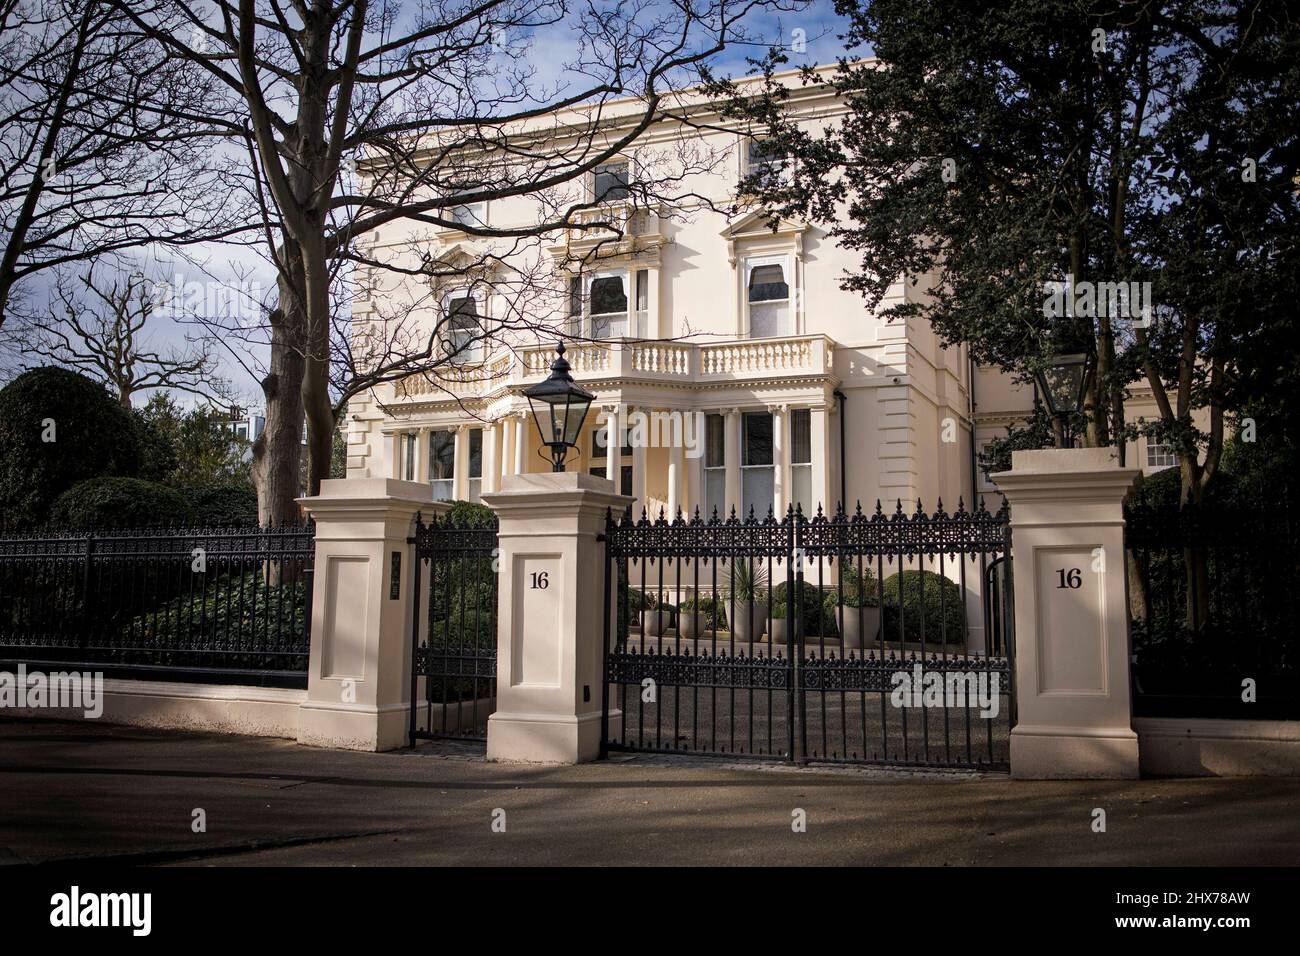 London, UK, 19th March 2022. Demonstrators gathered outside a mansion in  Holland Park owned by Russian oligarch Vladimir Yevtushenkov (aka  Evtushenkov), owner of Kronshtadt, part of Sistema Group, which the  protesters say